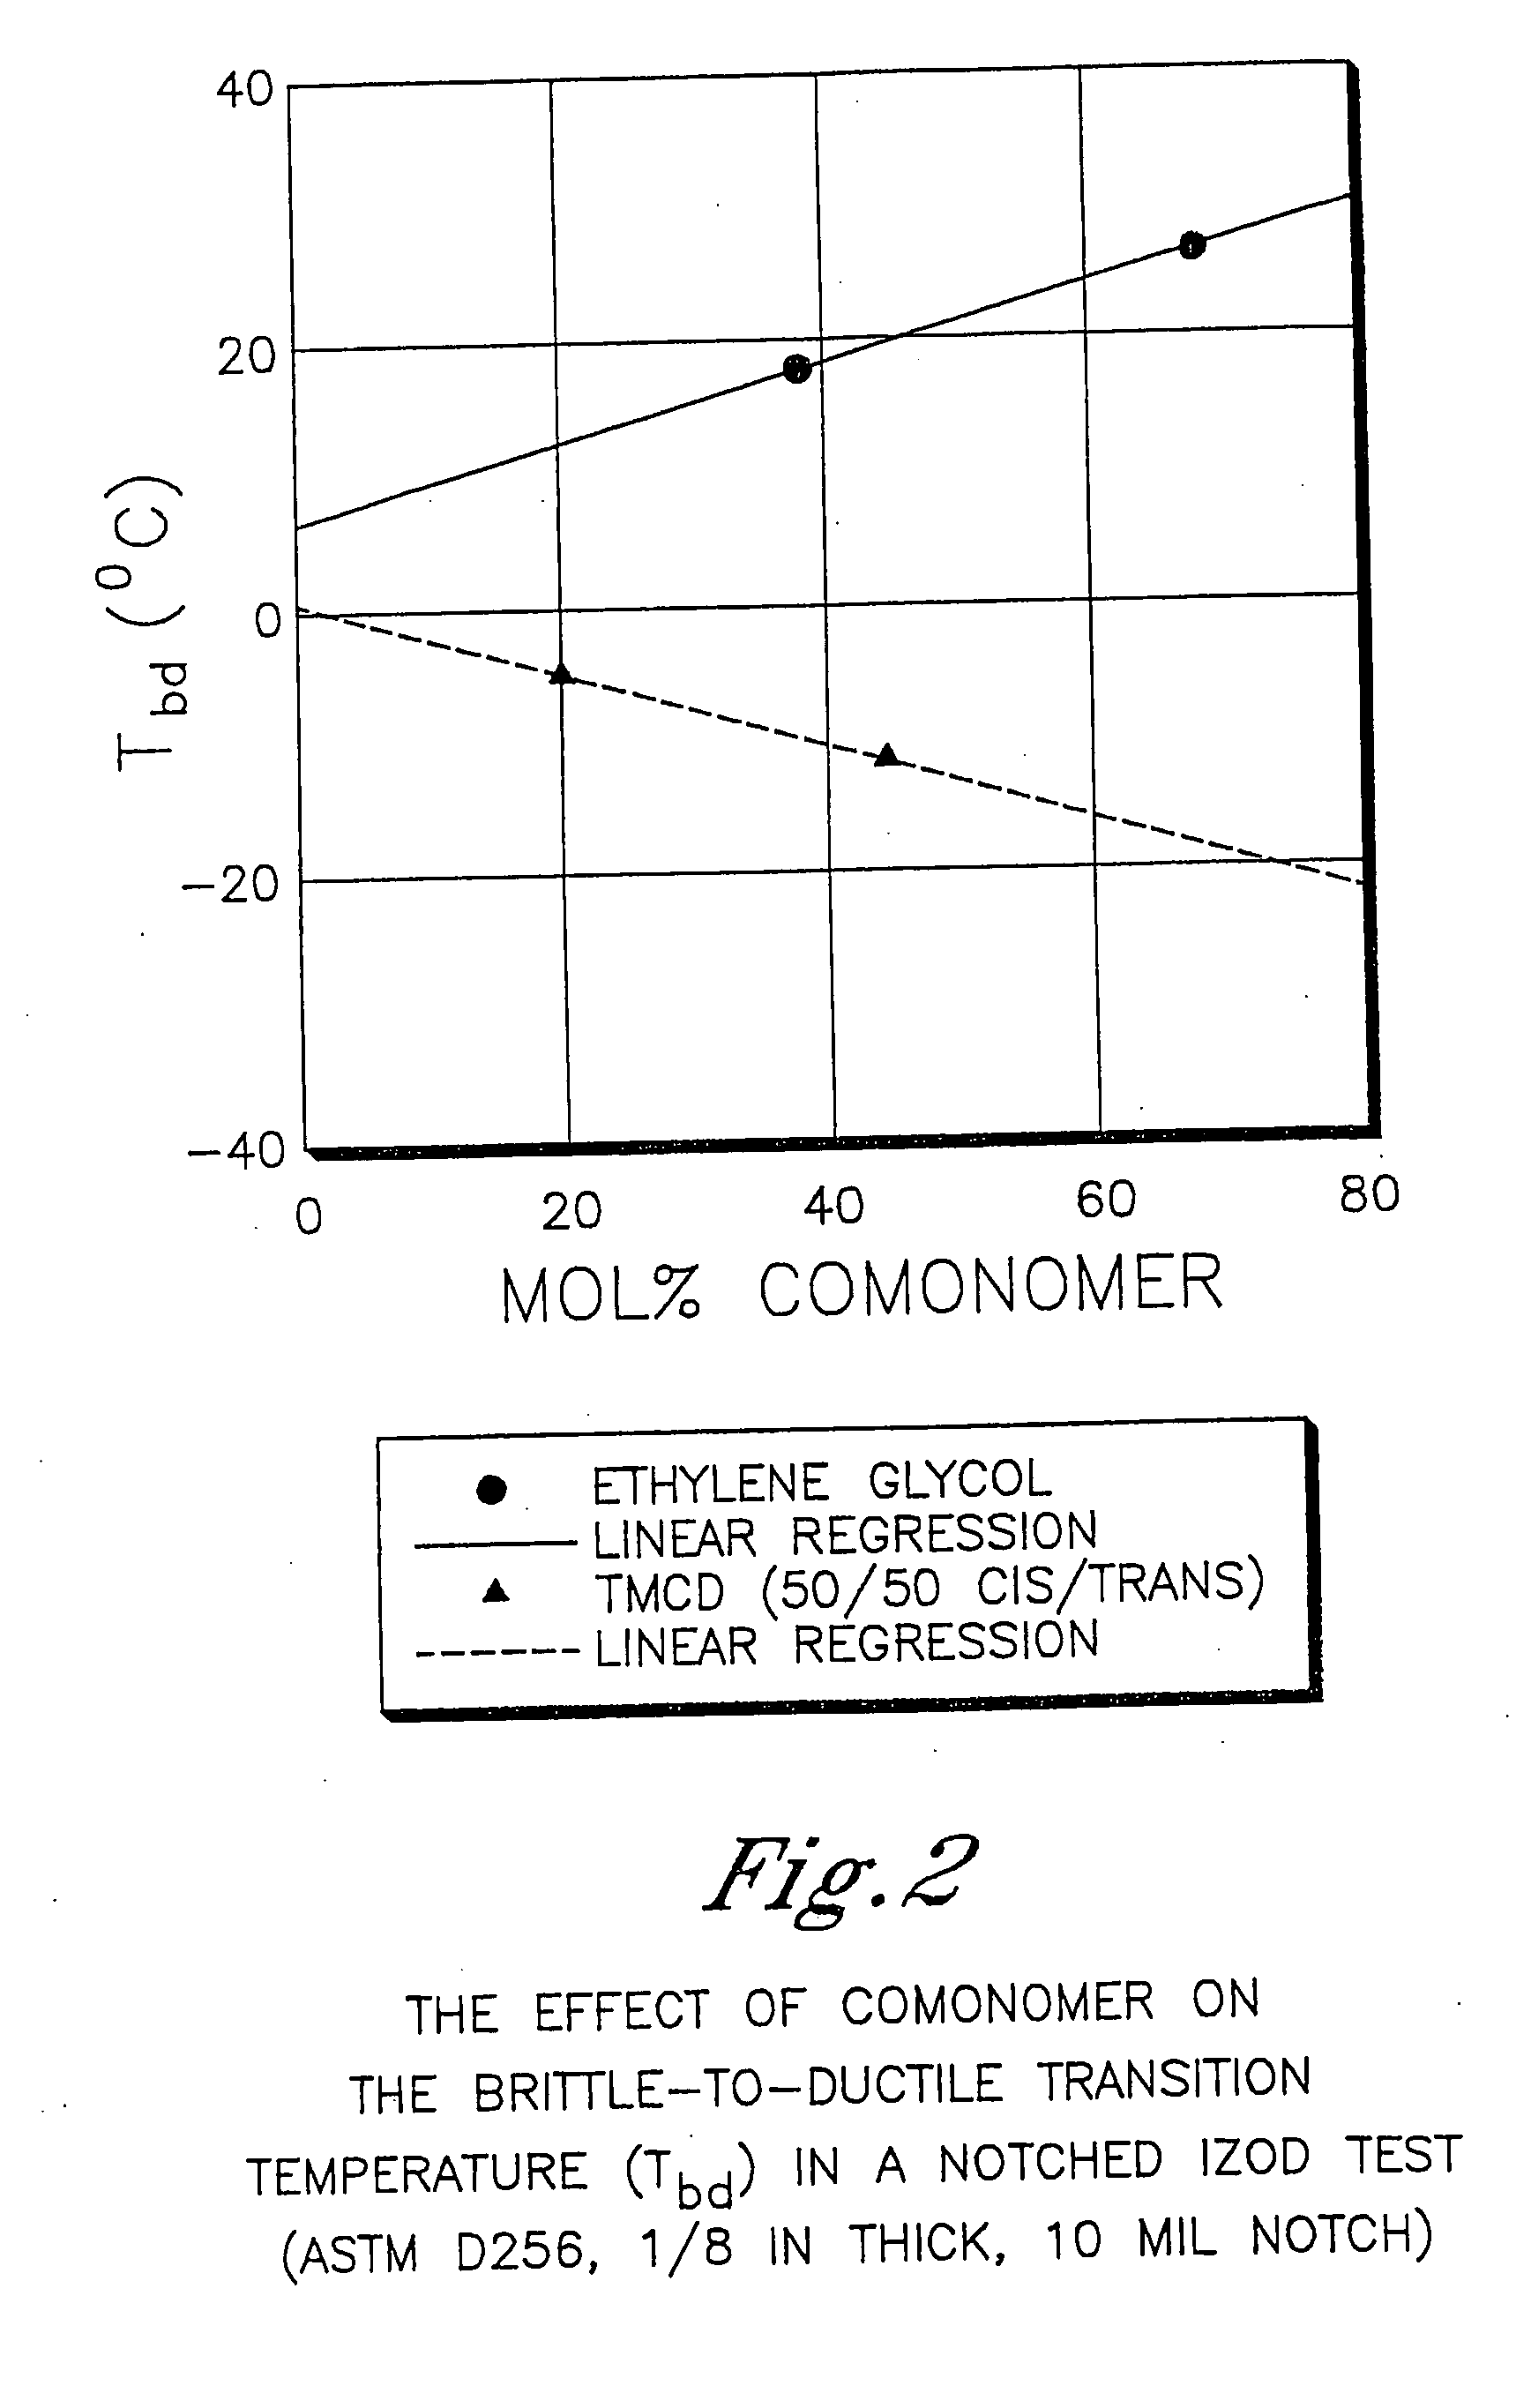 Greenhouses comprising polyester compositions formed from 2,2,4,4-tetramethyl-1,3-cyclobutanediol and 1,4- cyclohexanedimethanol